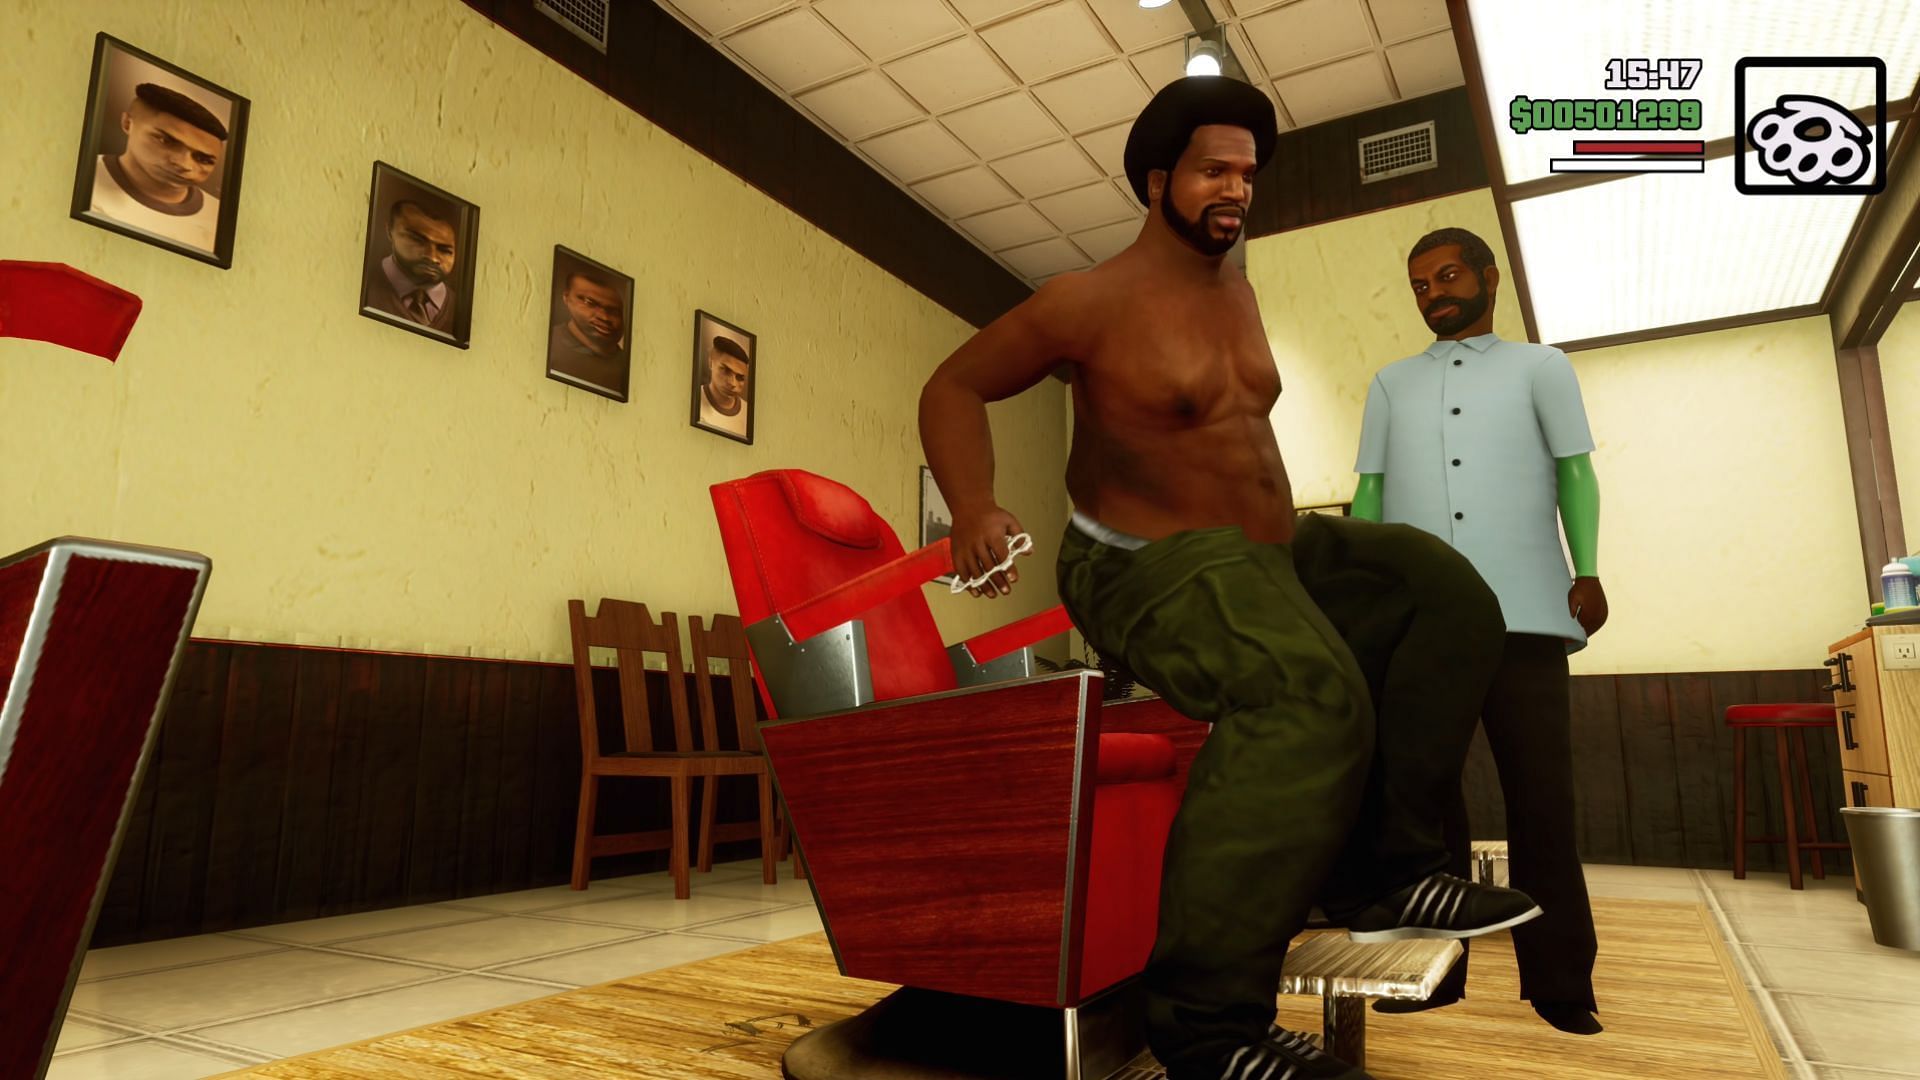 Other protagonists can&#039;t get fat like CJ (Image via Rockstar Games)